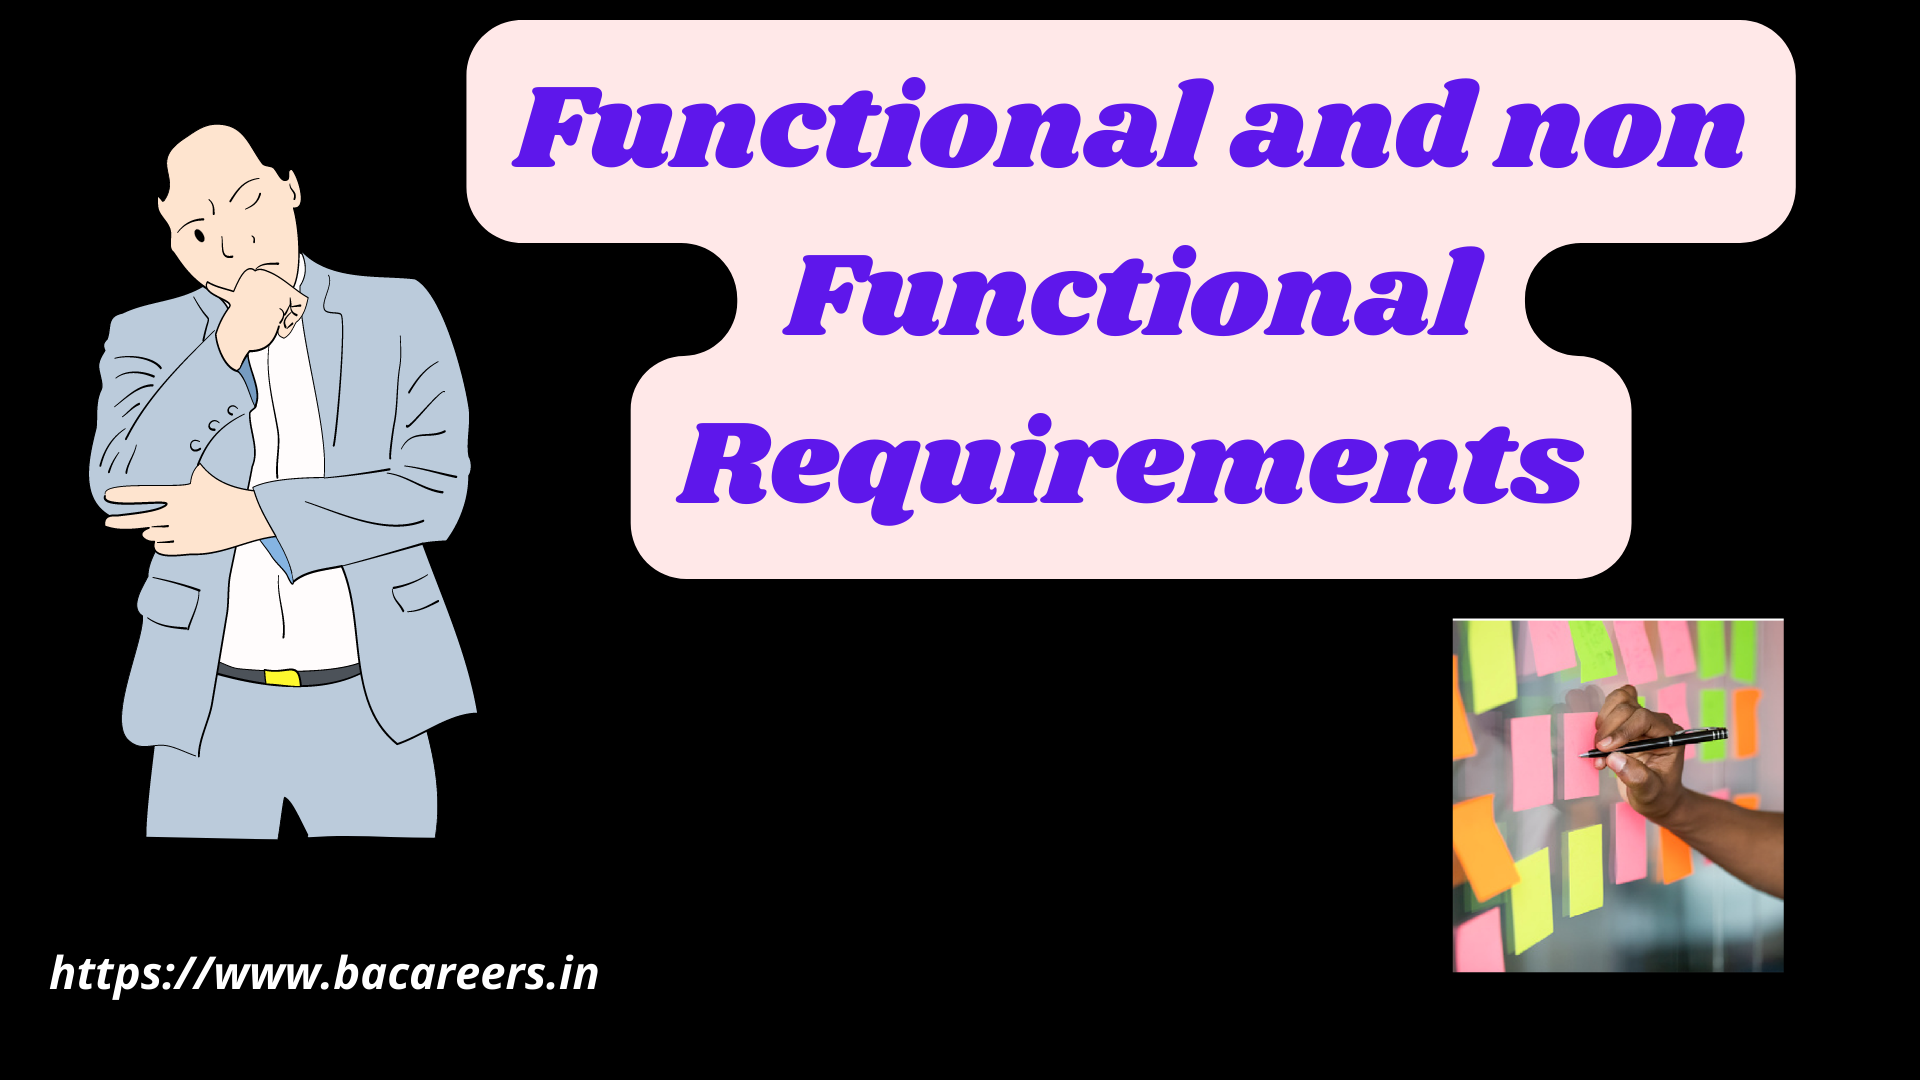 Functional and non Functional Requirements